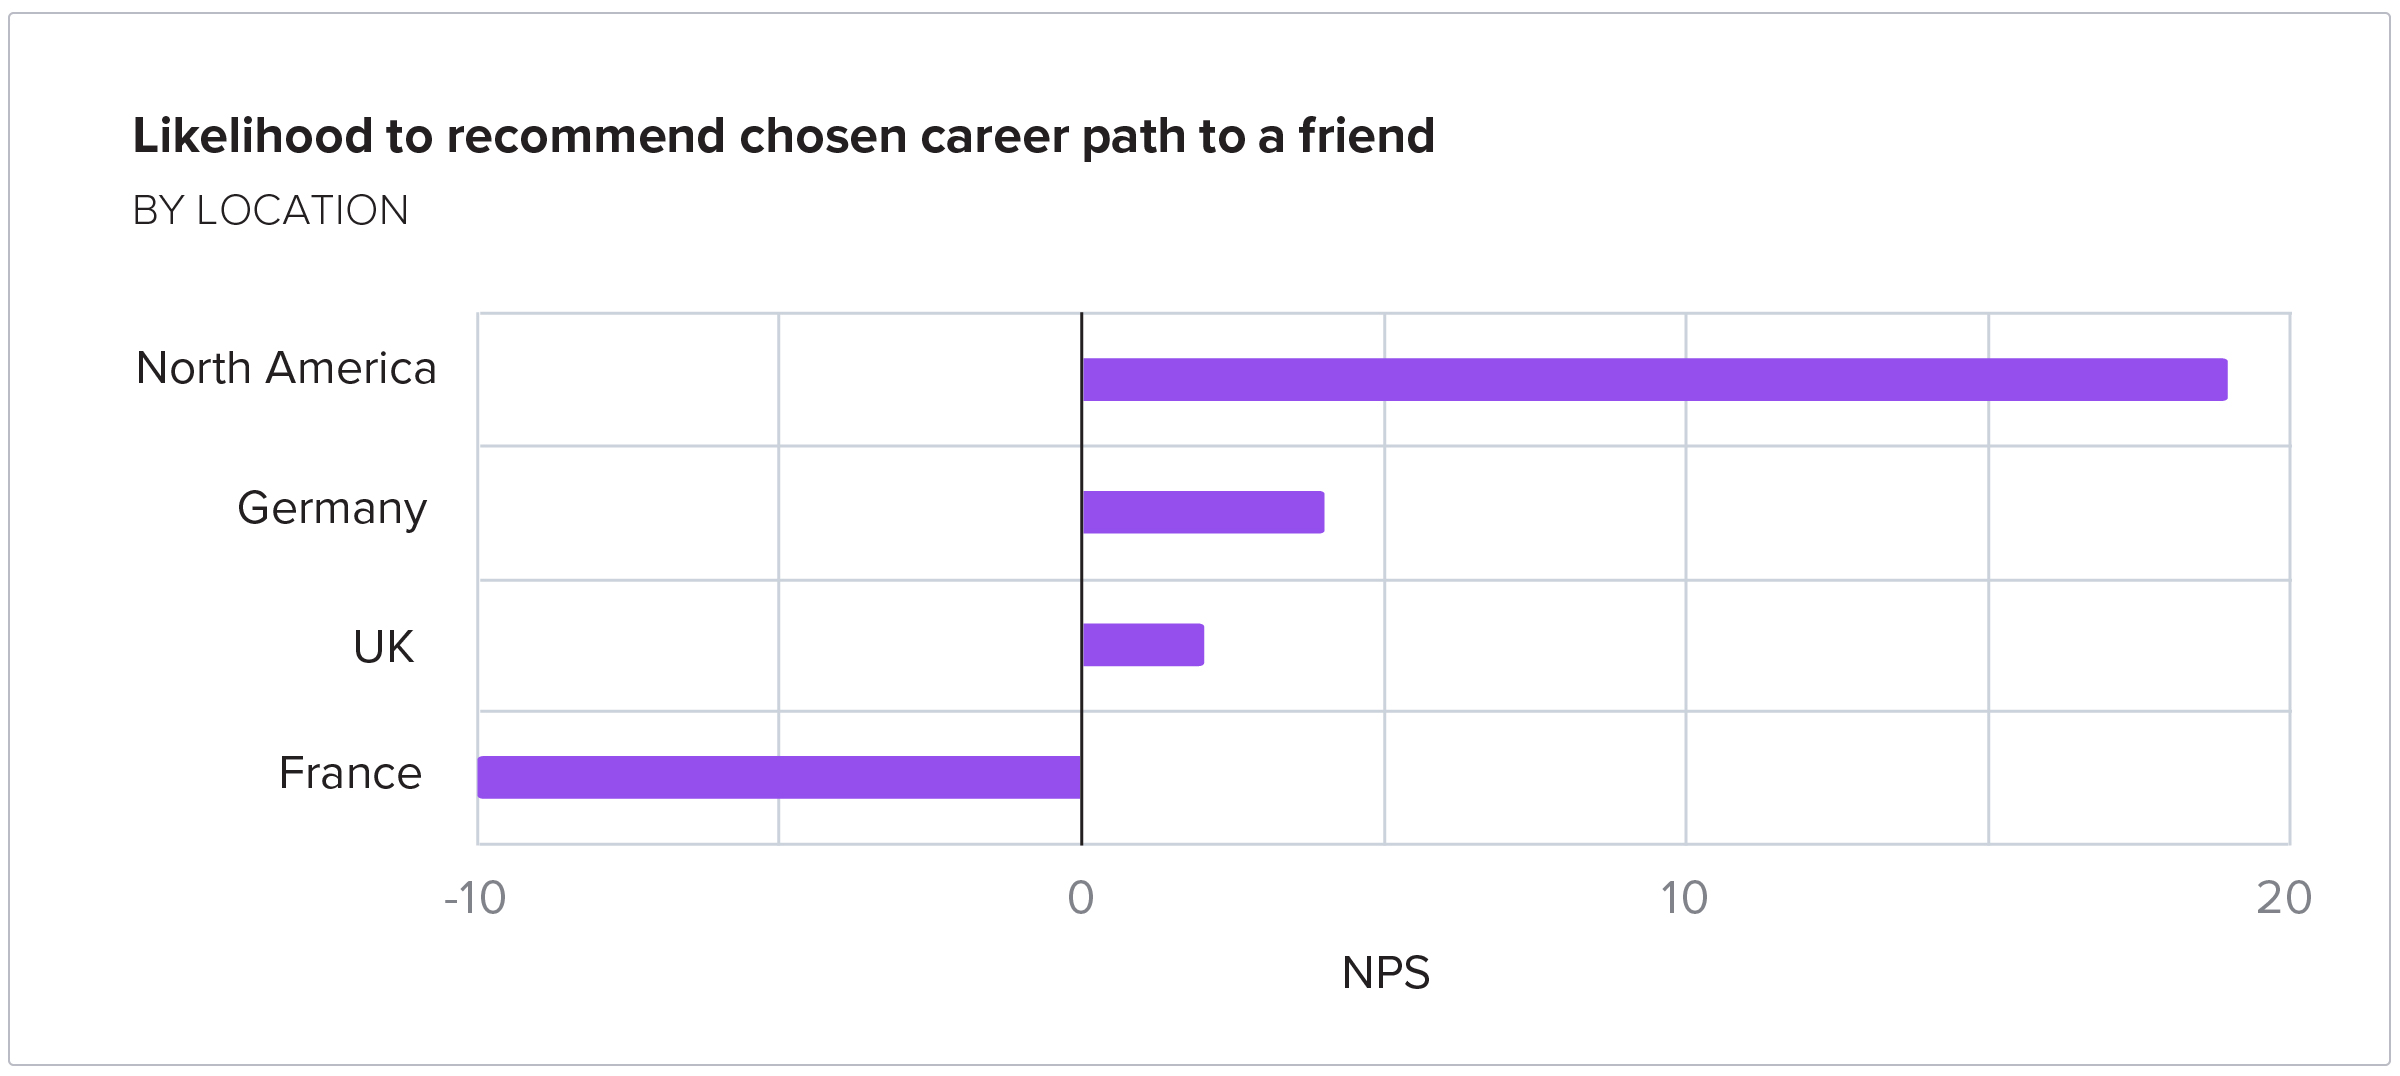 Likelihood to recommend chosen career path to a friend BY LOCATION